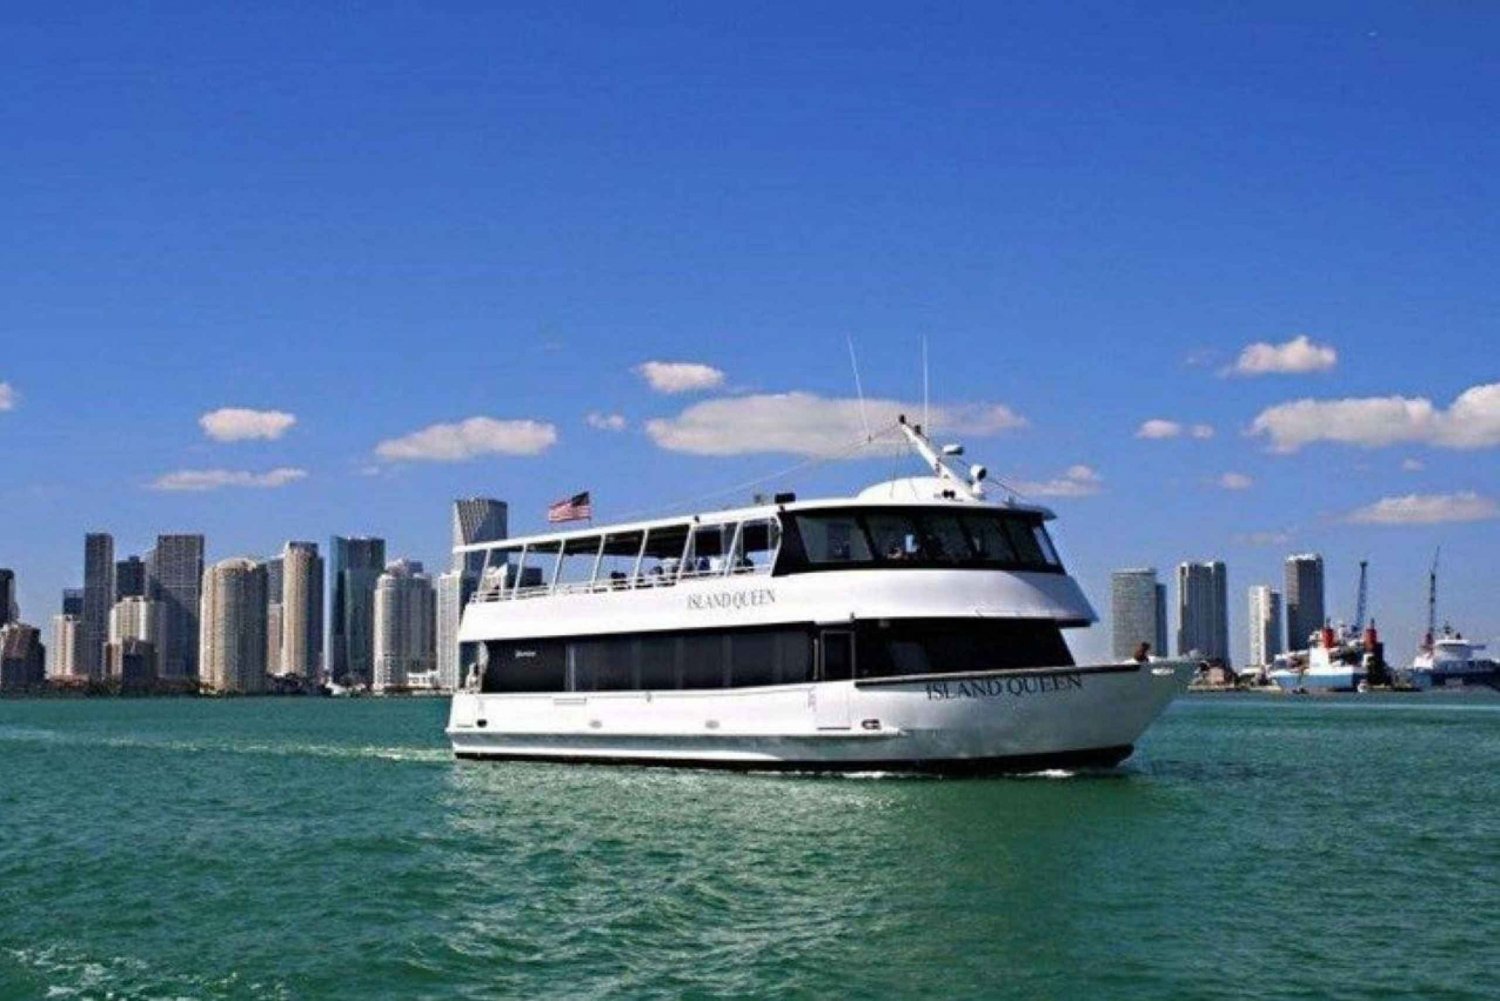 Miami: Biscayne Bay Boat Cruise with Transportation